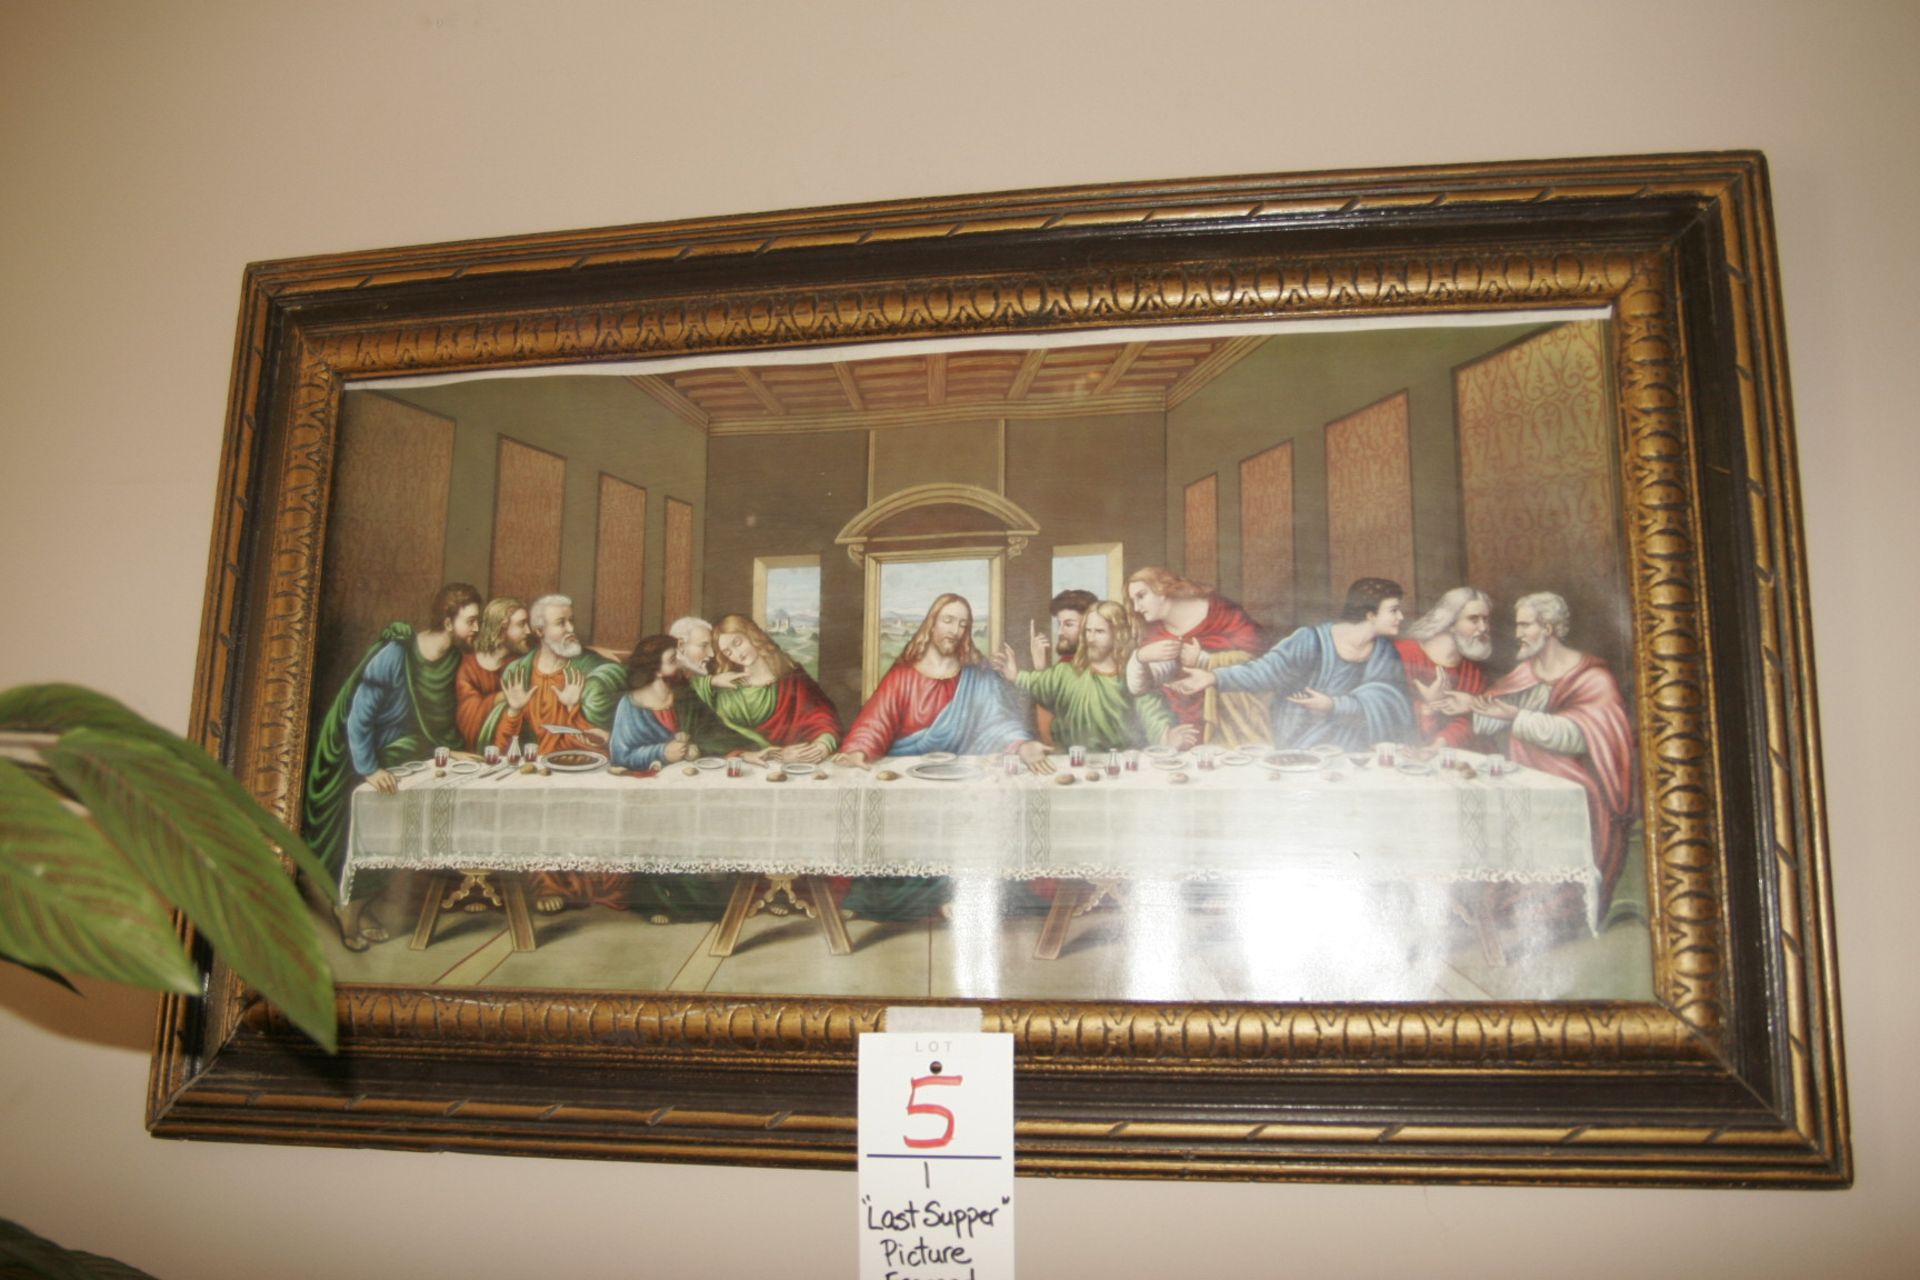 "Last Supper" Picture Framed